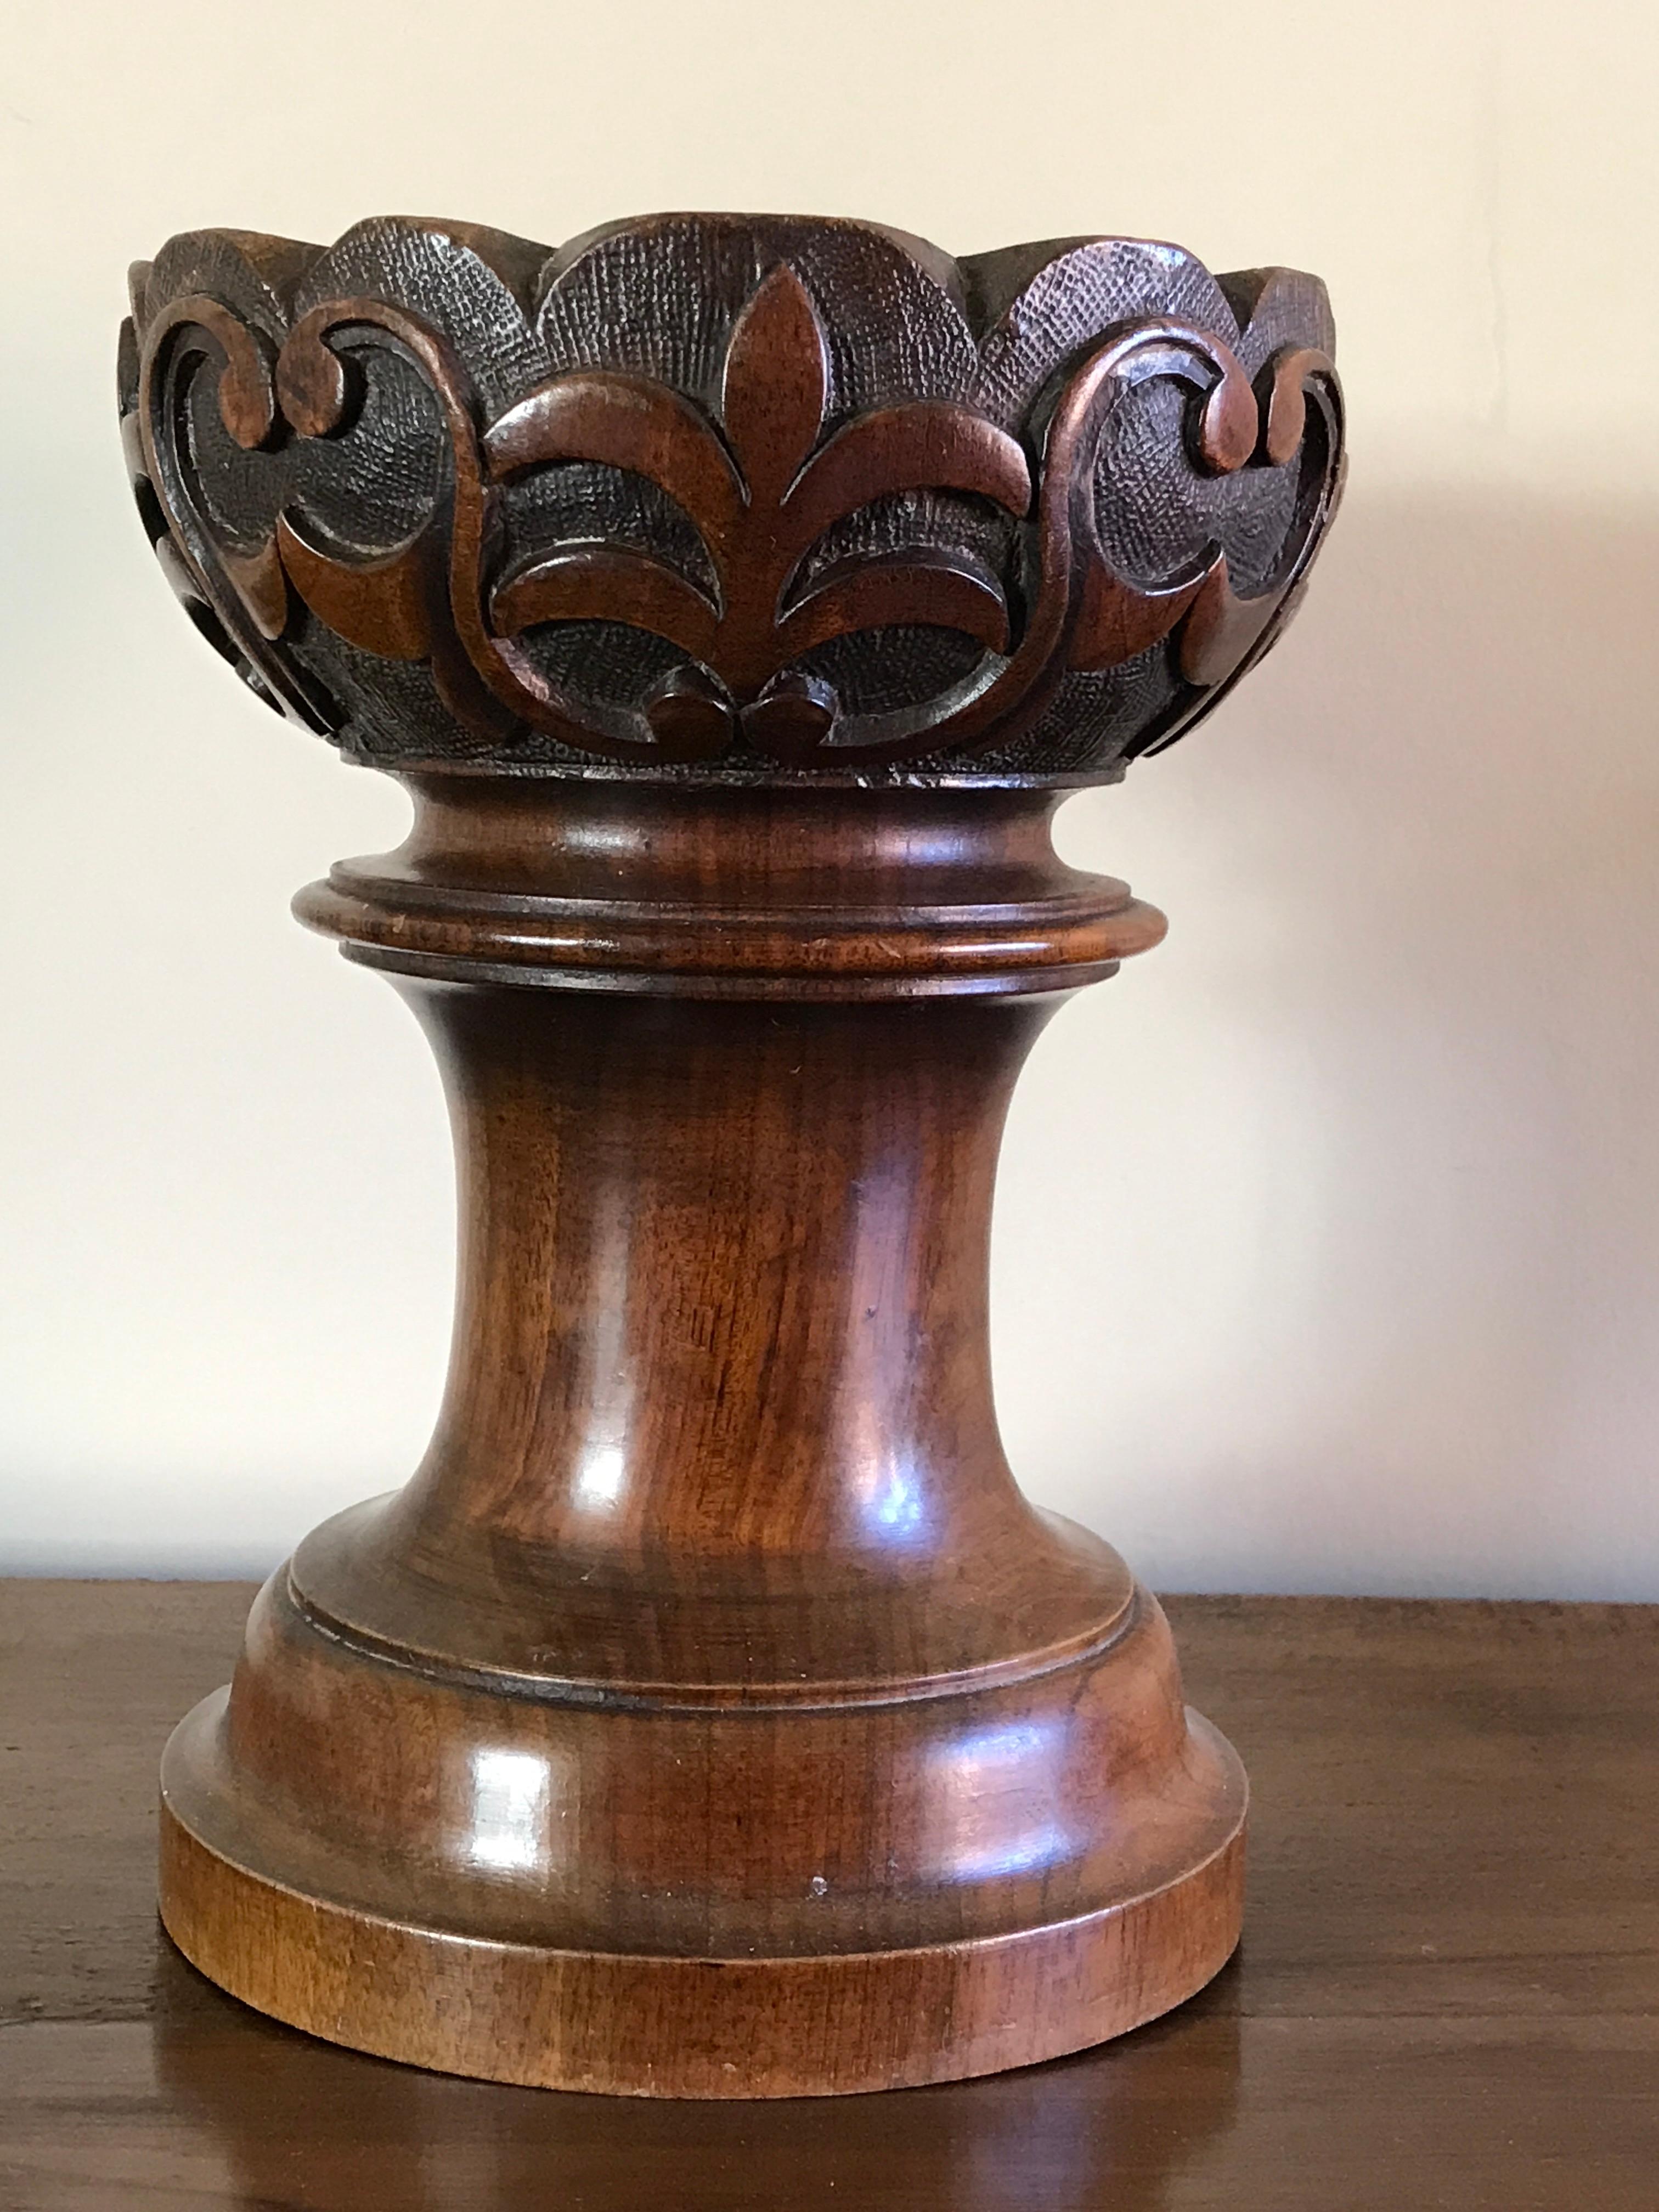 Re-purposed as a holder for large candle or delicacies.

Conceived as a Gothic Revival architectural ornament probably a finial. Shaped top with a border of scrollwork and stylised leaf carving above a turned base.
outer diameter 18cm., 7